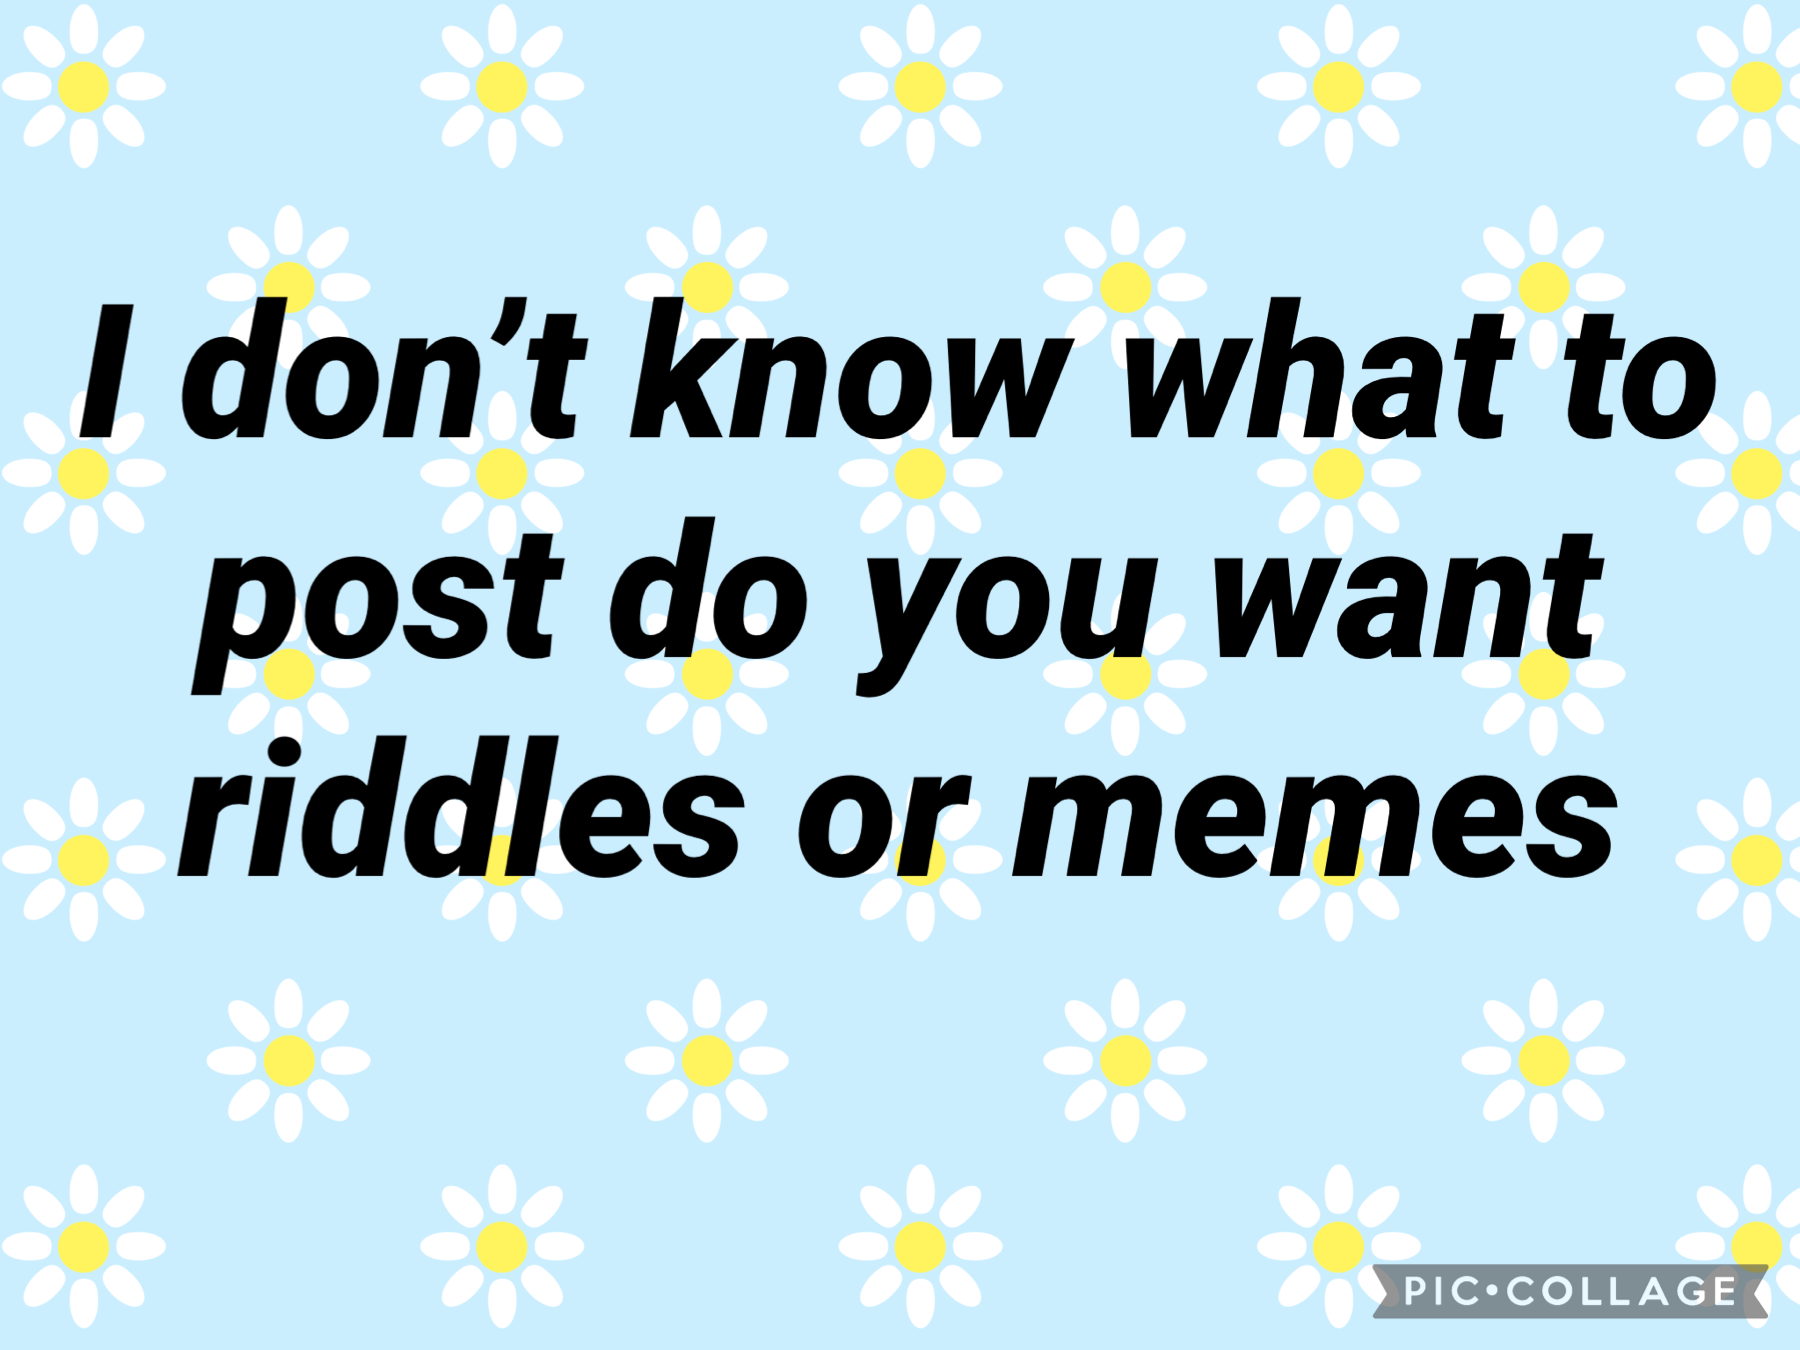 Comment riddle like memes 